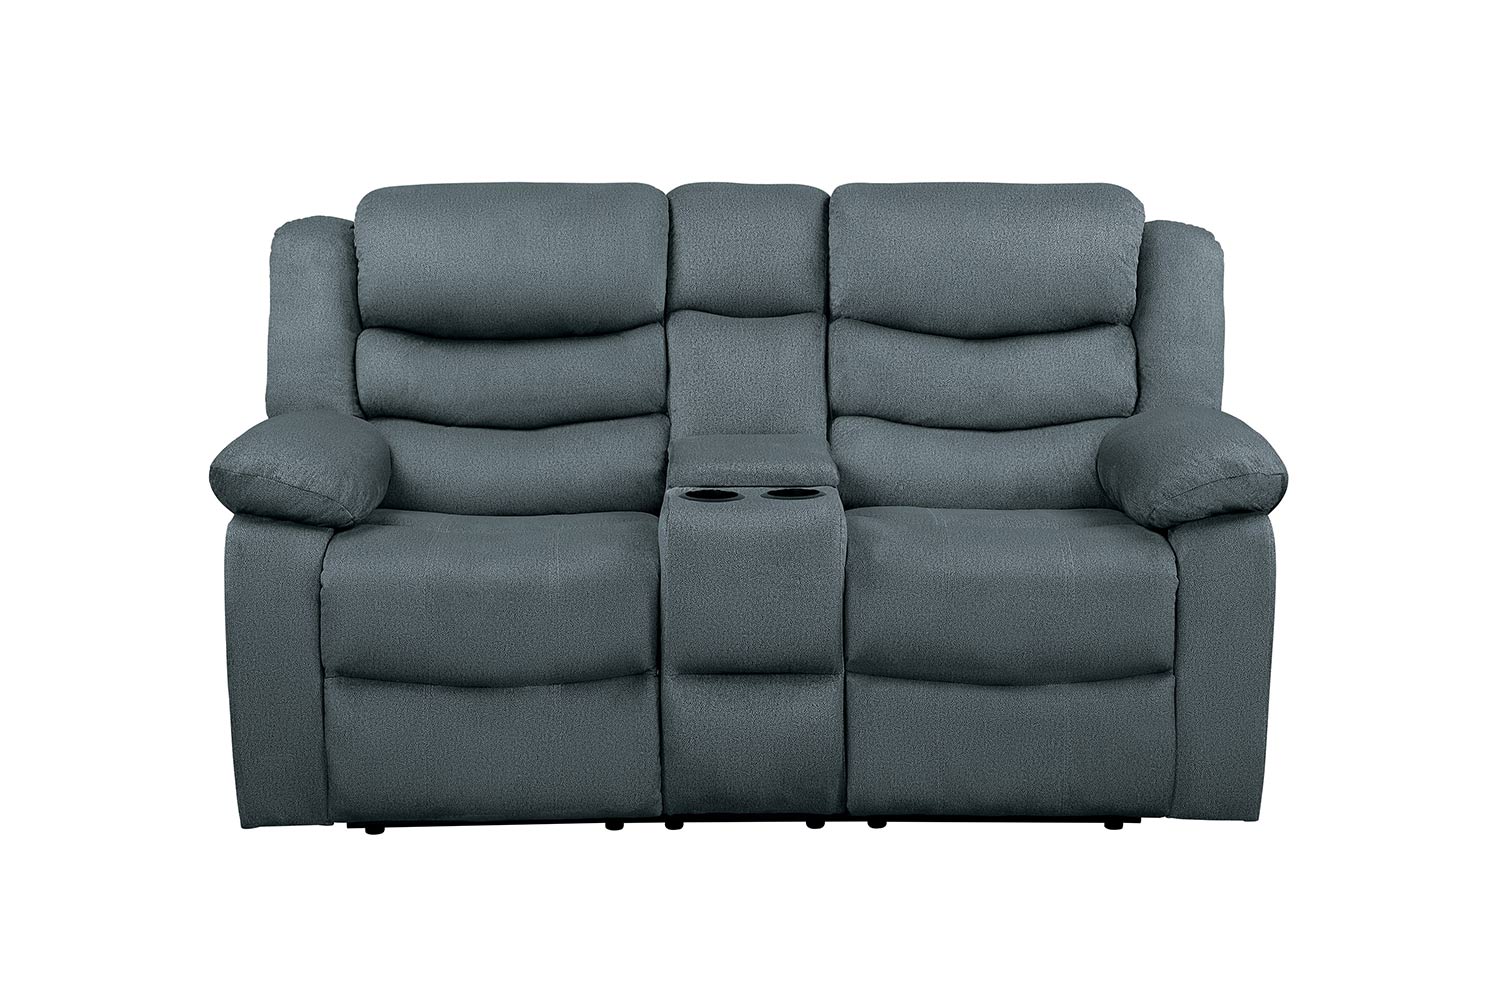 Homelegance Discus Double Reclining Love Seat with Center Console - Gray